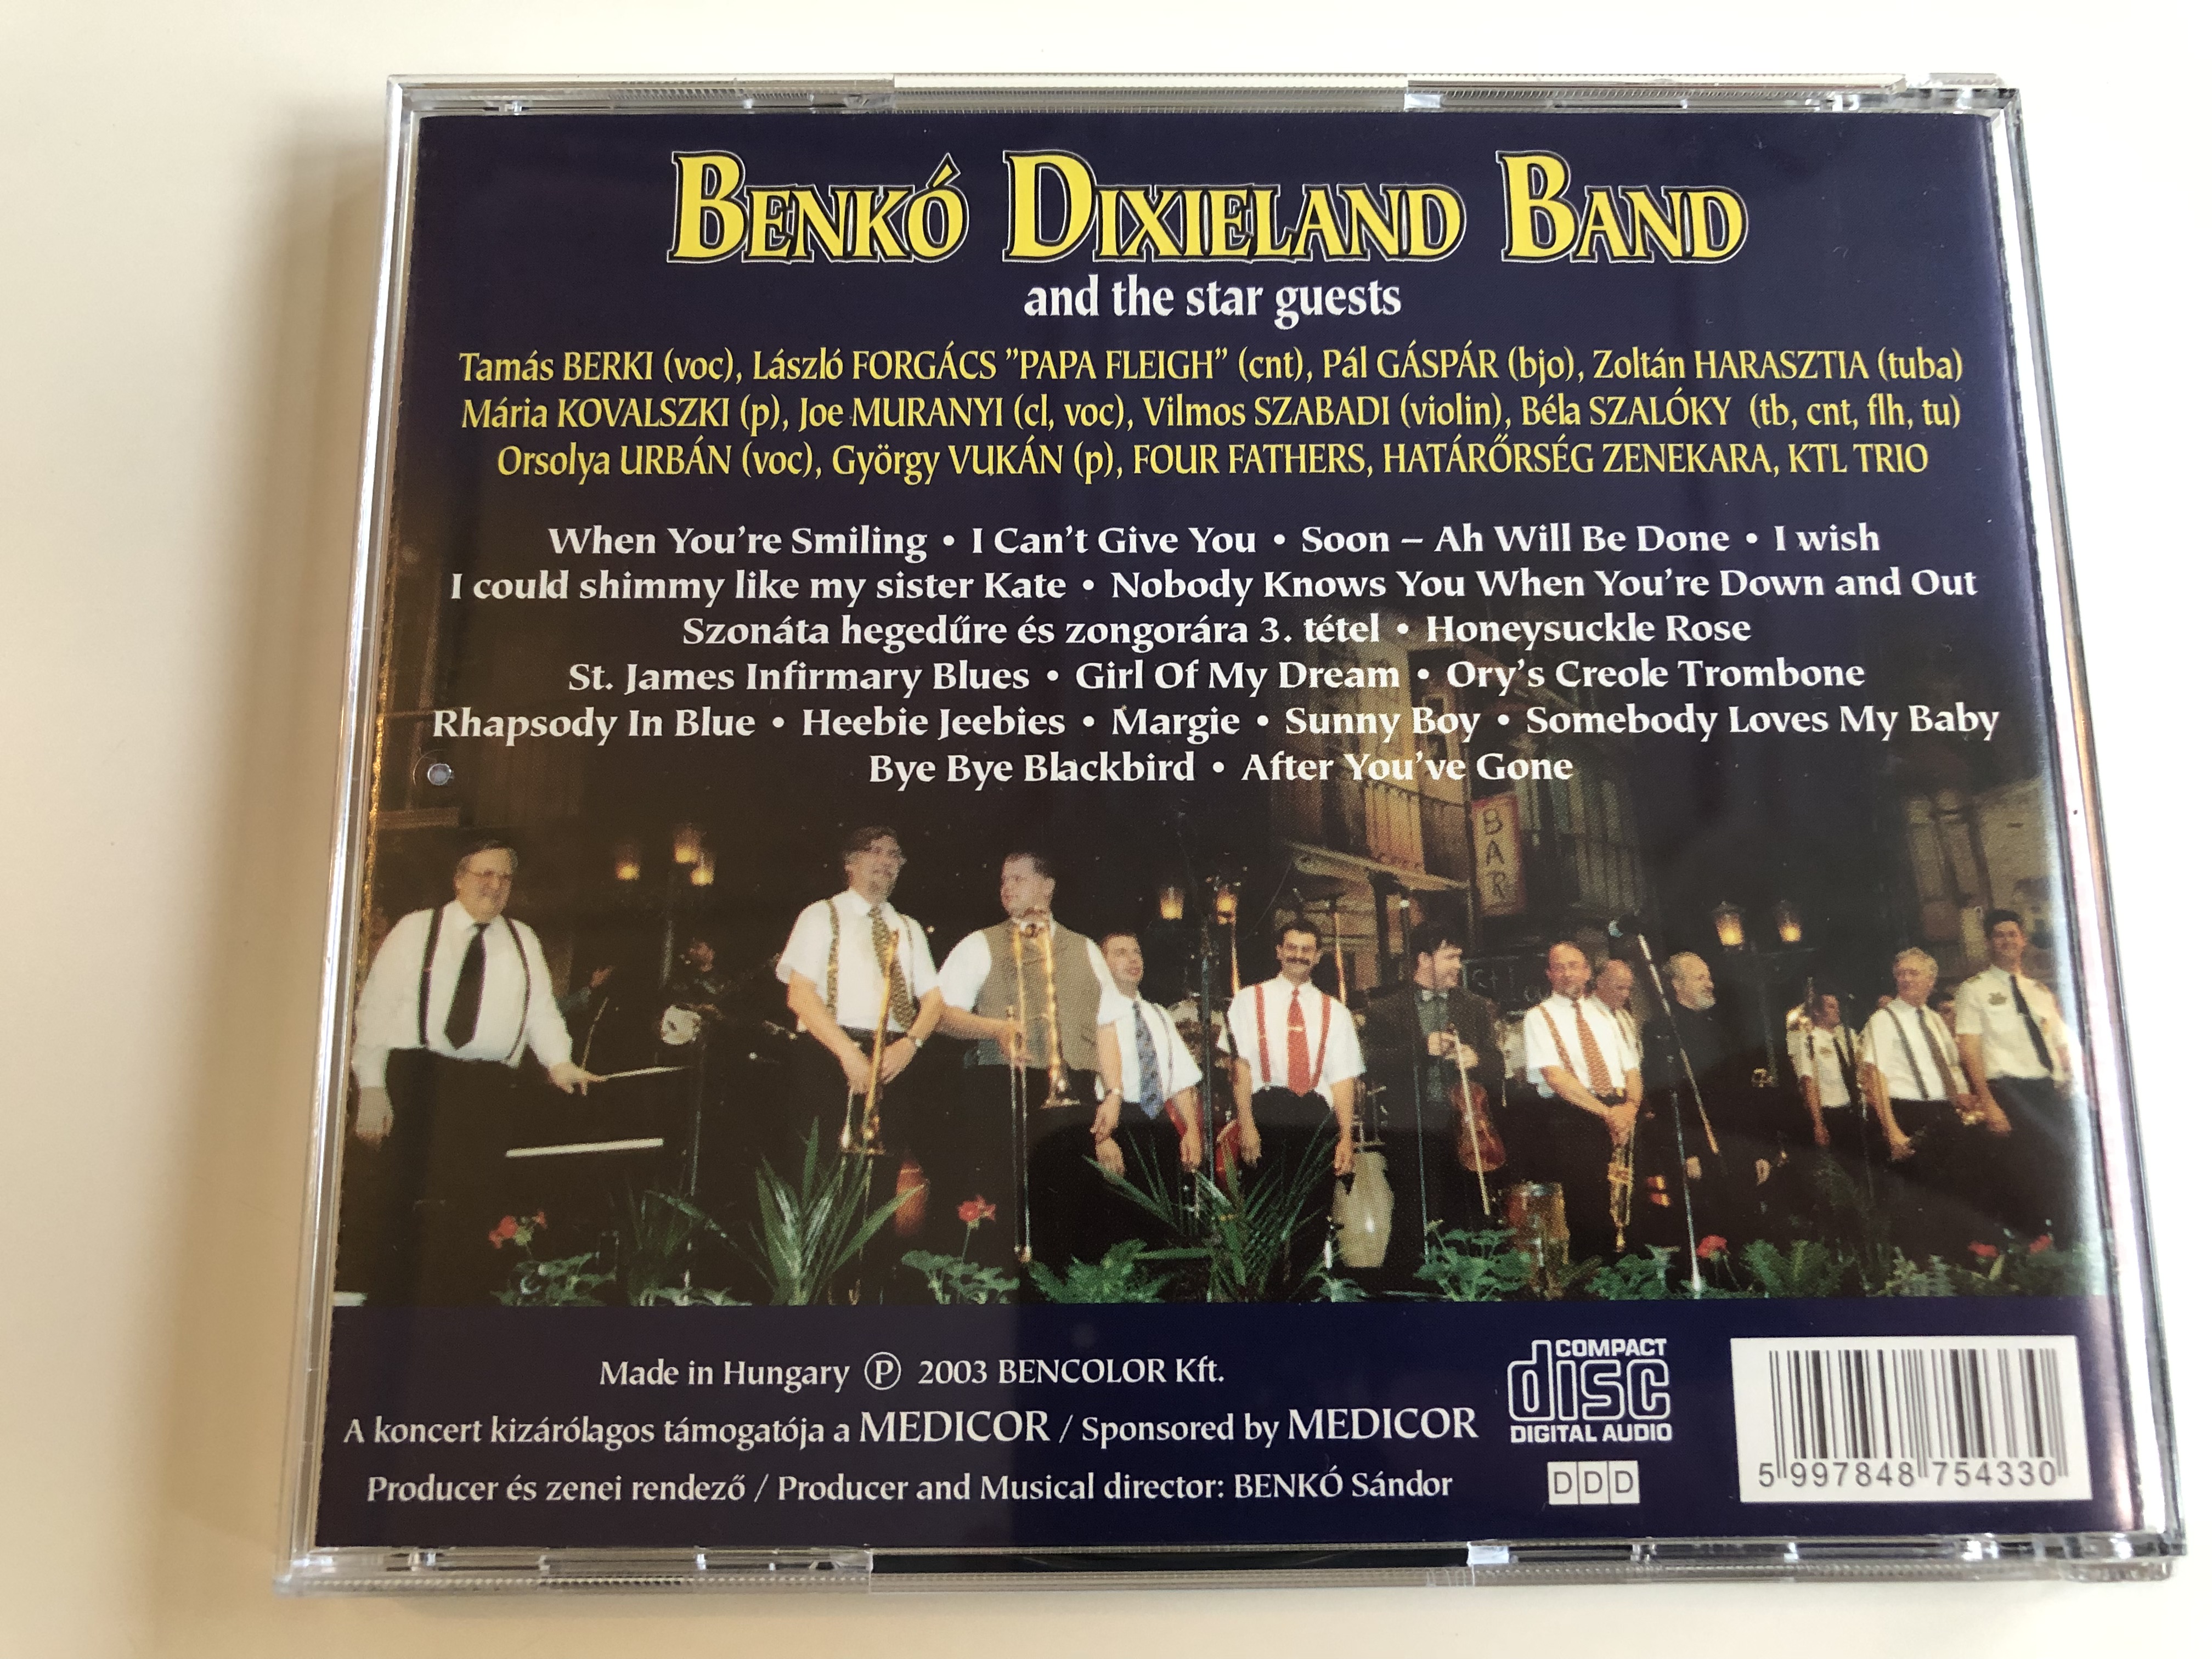 benk-dixieland-band-koncert-a-jazz-sz-let-s-t-l-napjainkig-1918-1928-from-the-birth-of-jazz-to-our-days-benk-dixieland-band-concert-1918-1928-part-two-ii.-r-sz-golden-age-of-chicago-6-.jpg